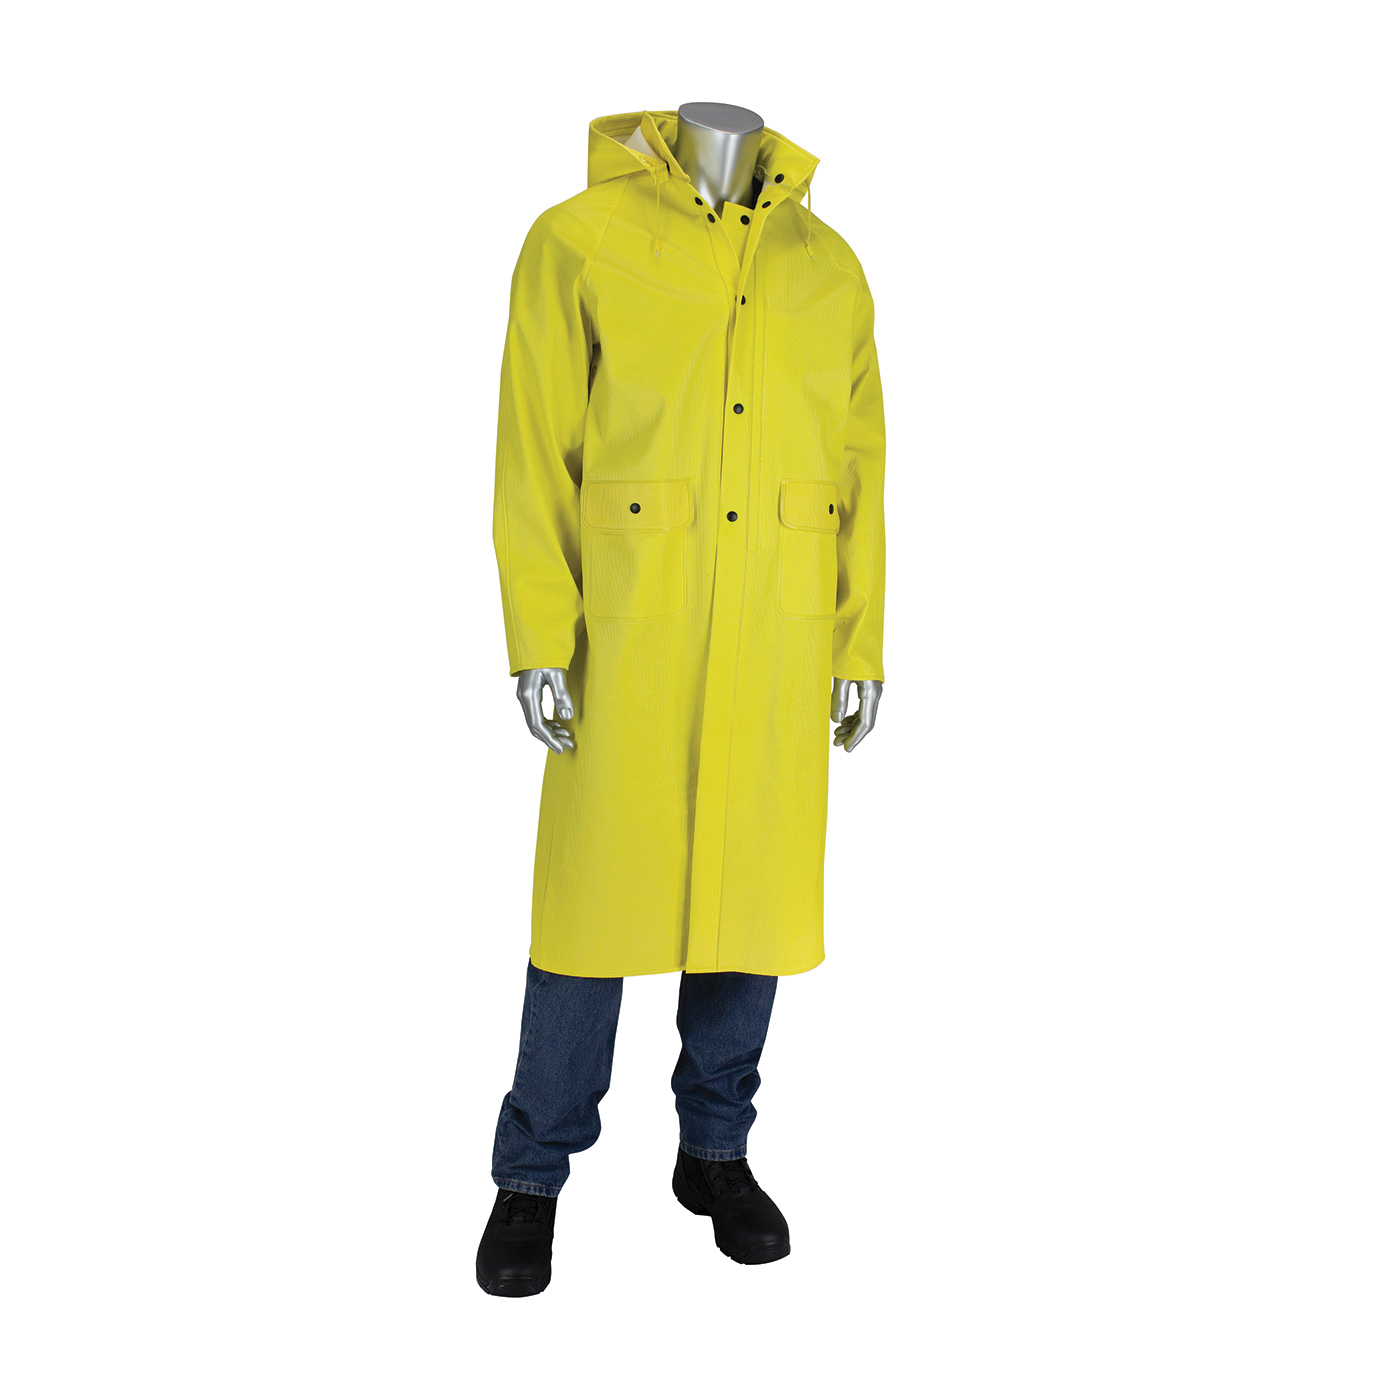 PIP® FALCON™ Flex™ 201-650C/M 2-Piece Ribbed Rain Jacket With Hood, M, Yellow, PVC/Non-Woven Polyester, Resists: Rips, Tear and Water